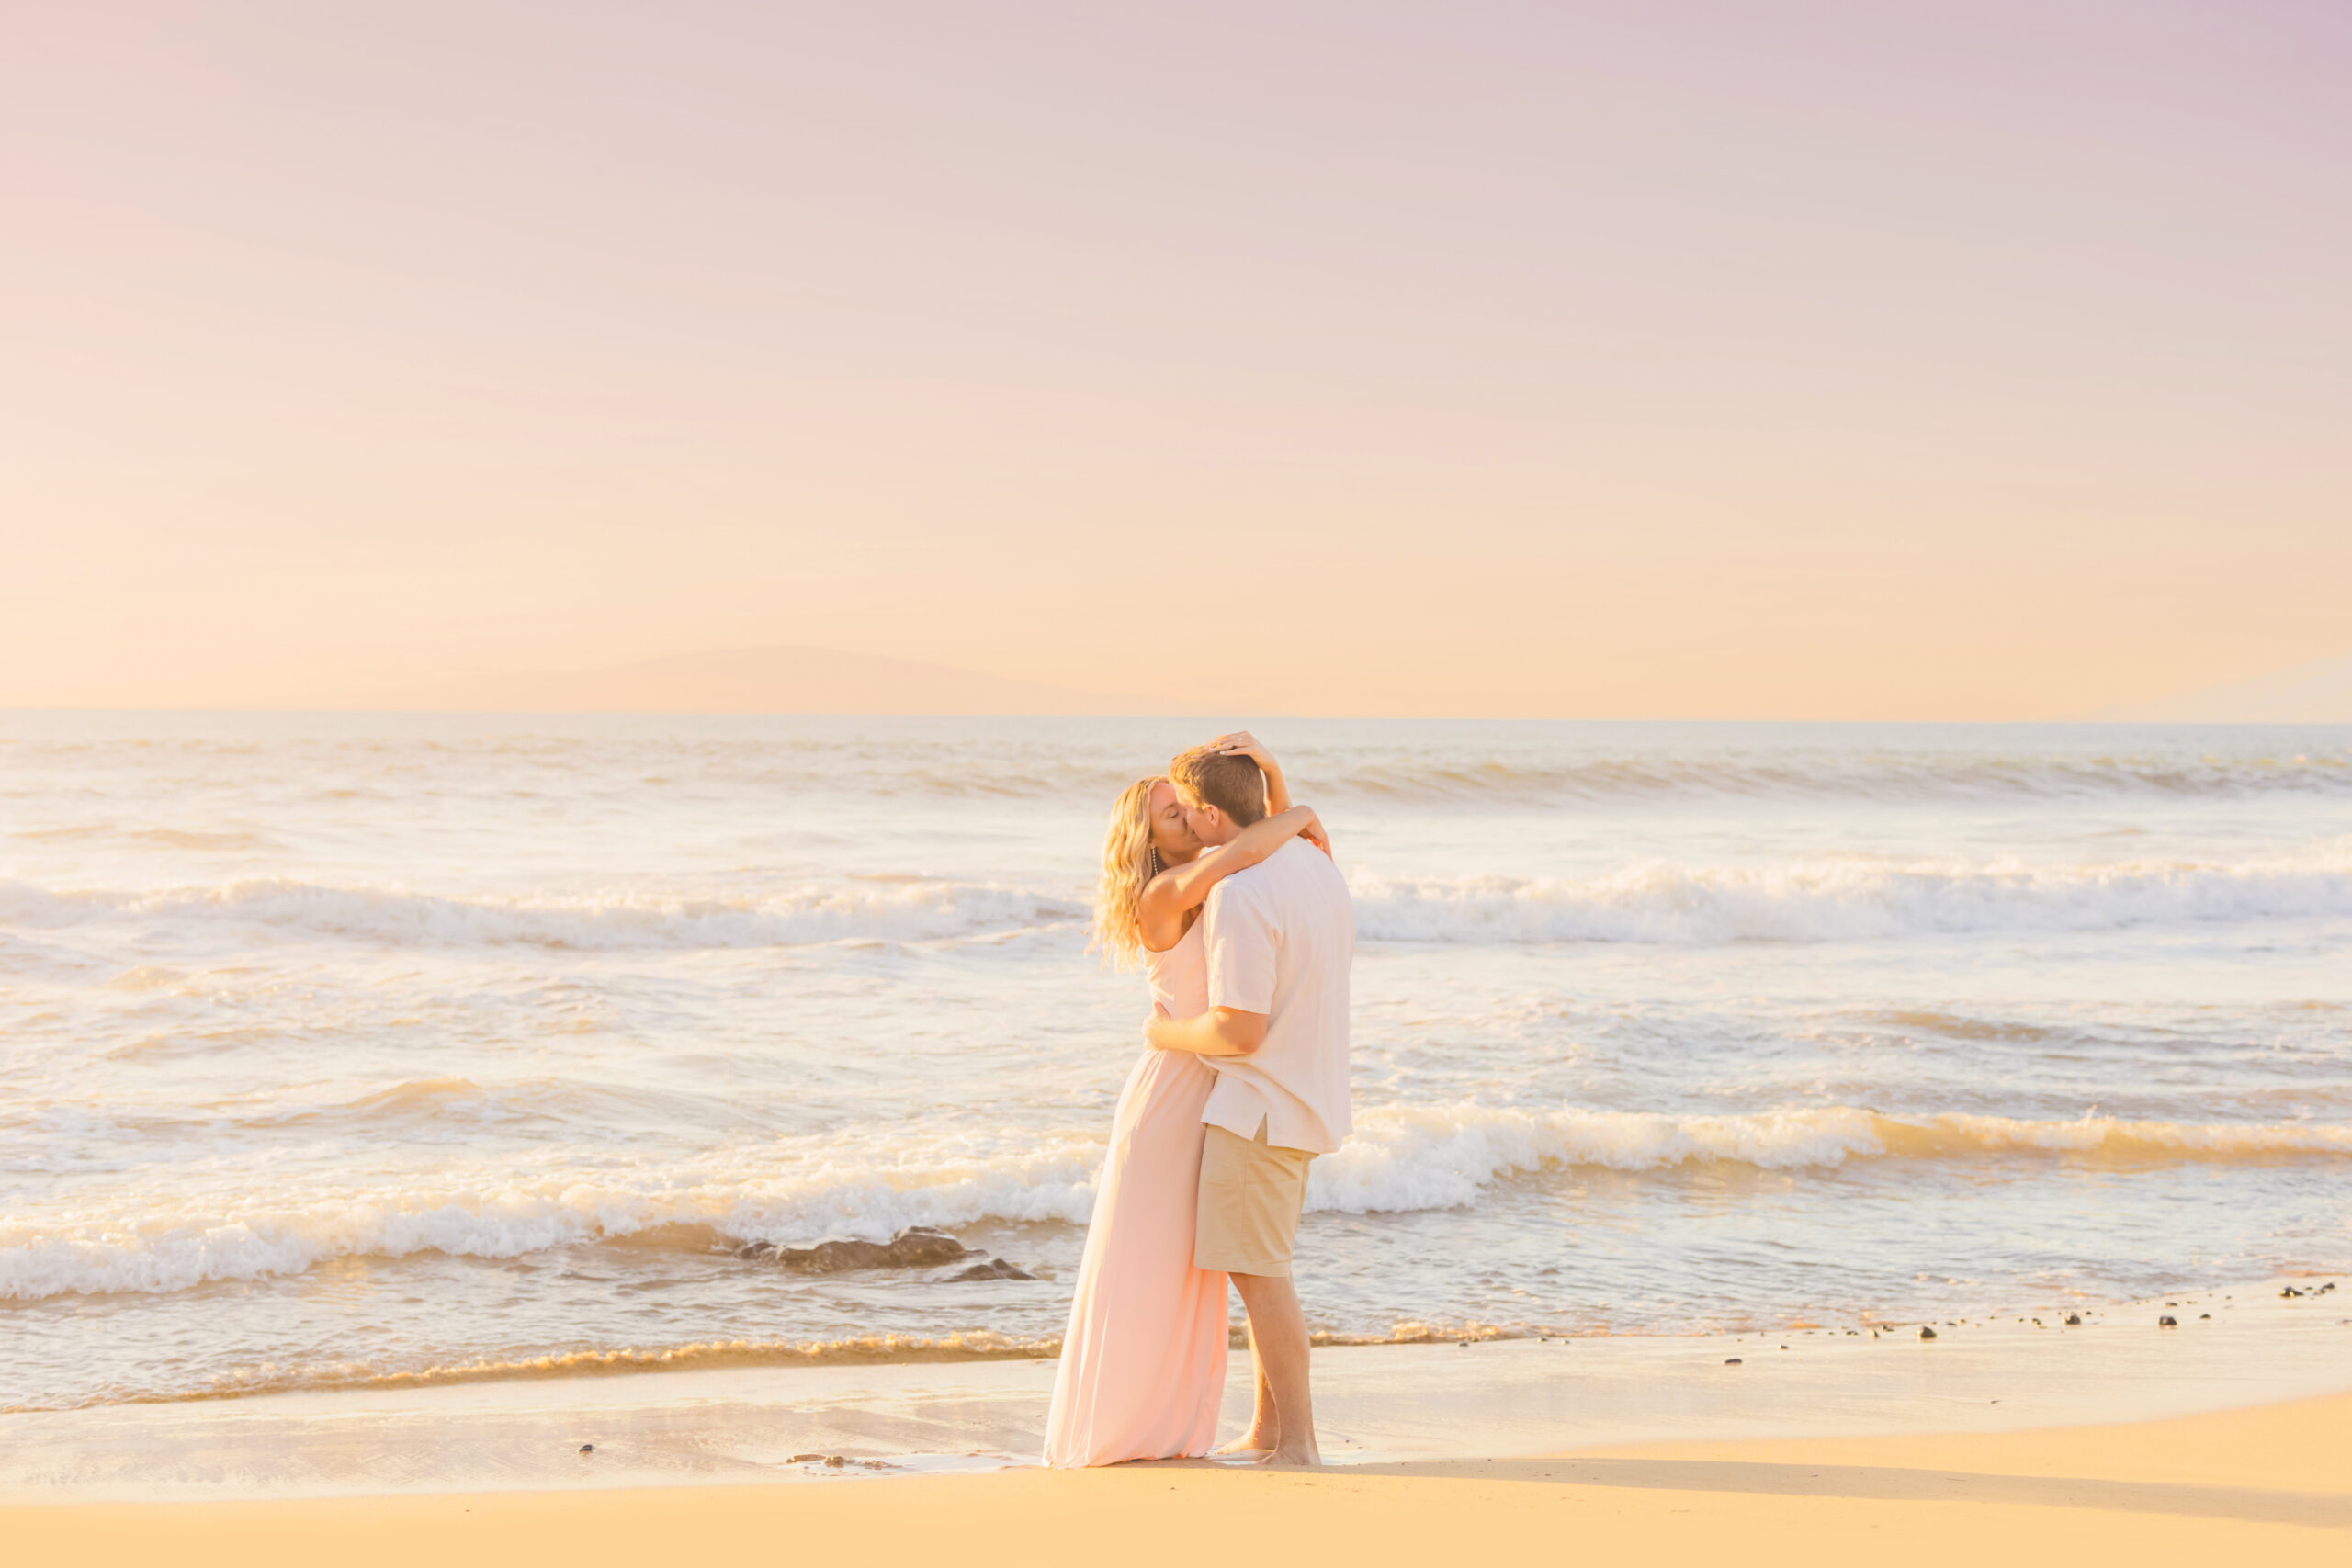 male and female couple kisses on a beach in Hawaii as the waves crash on the shore during an engagement photoshoot